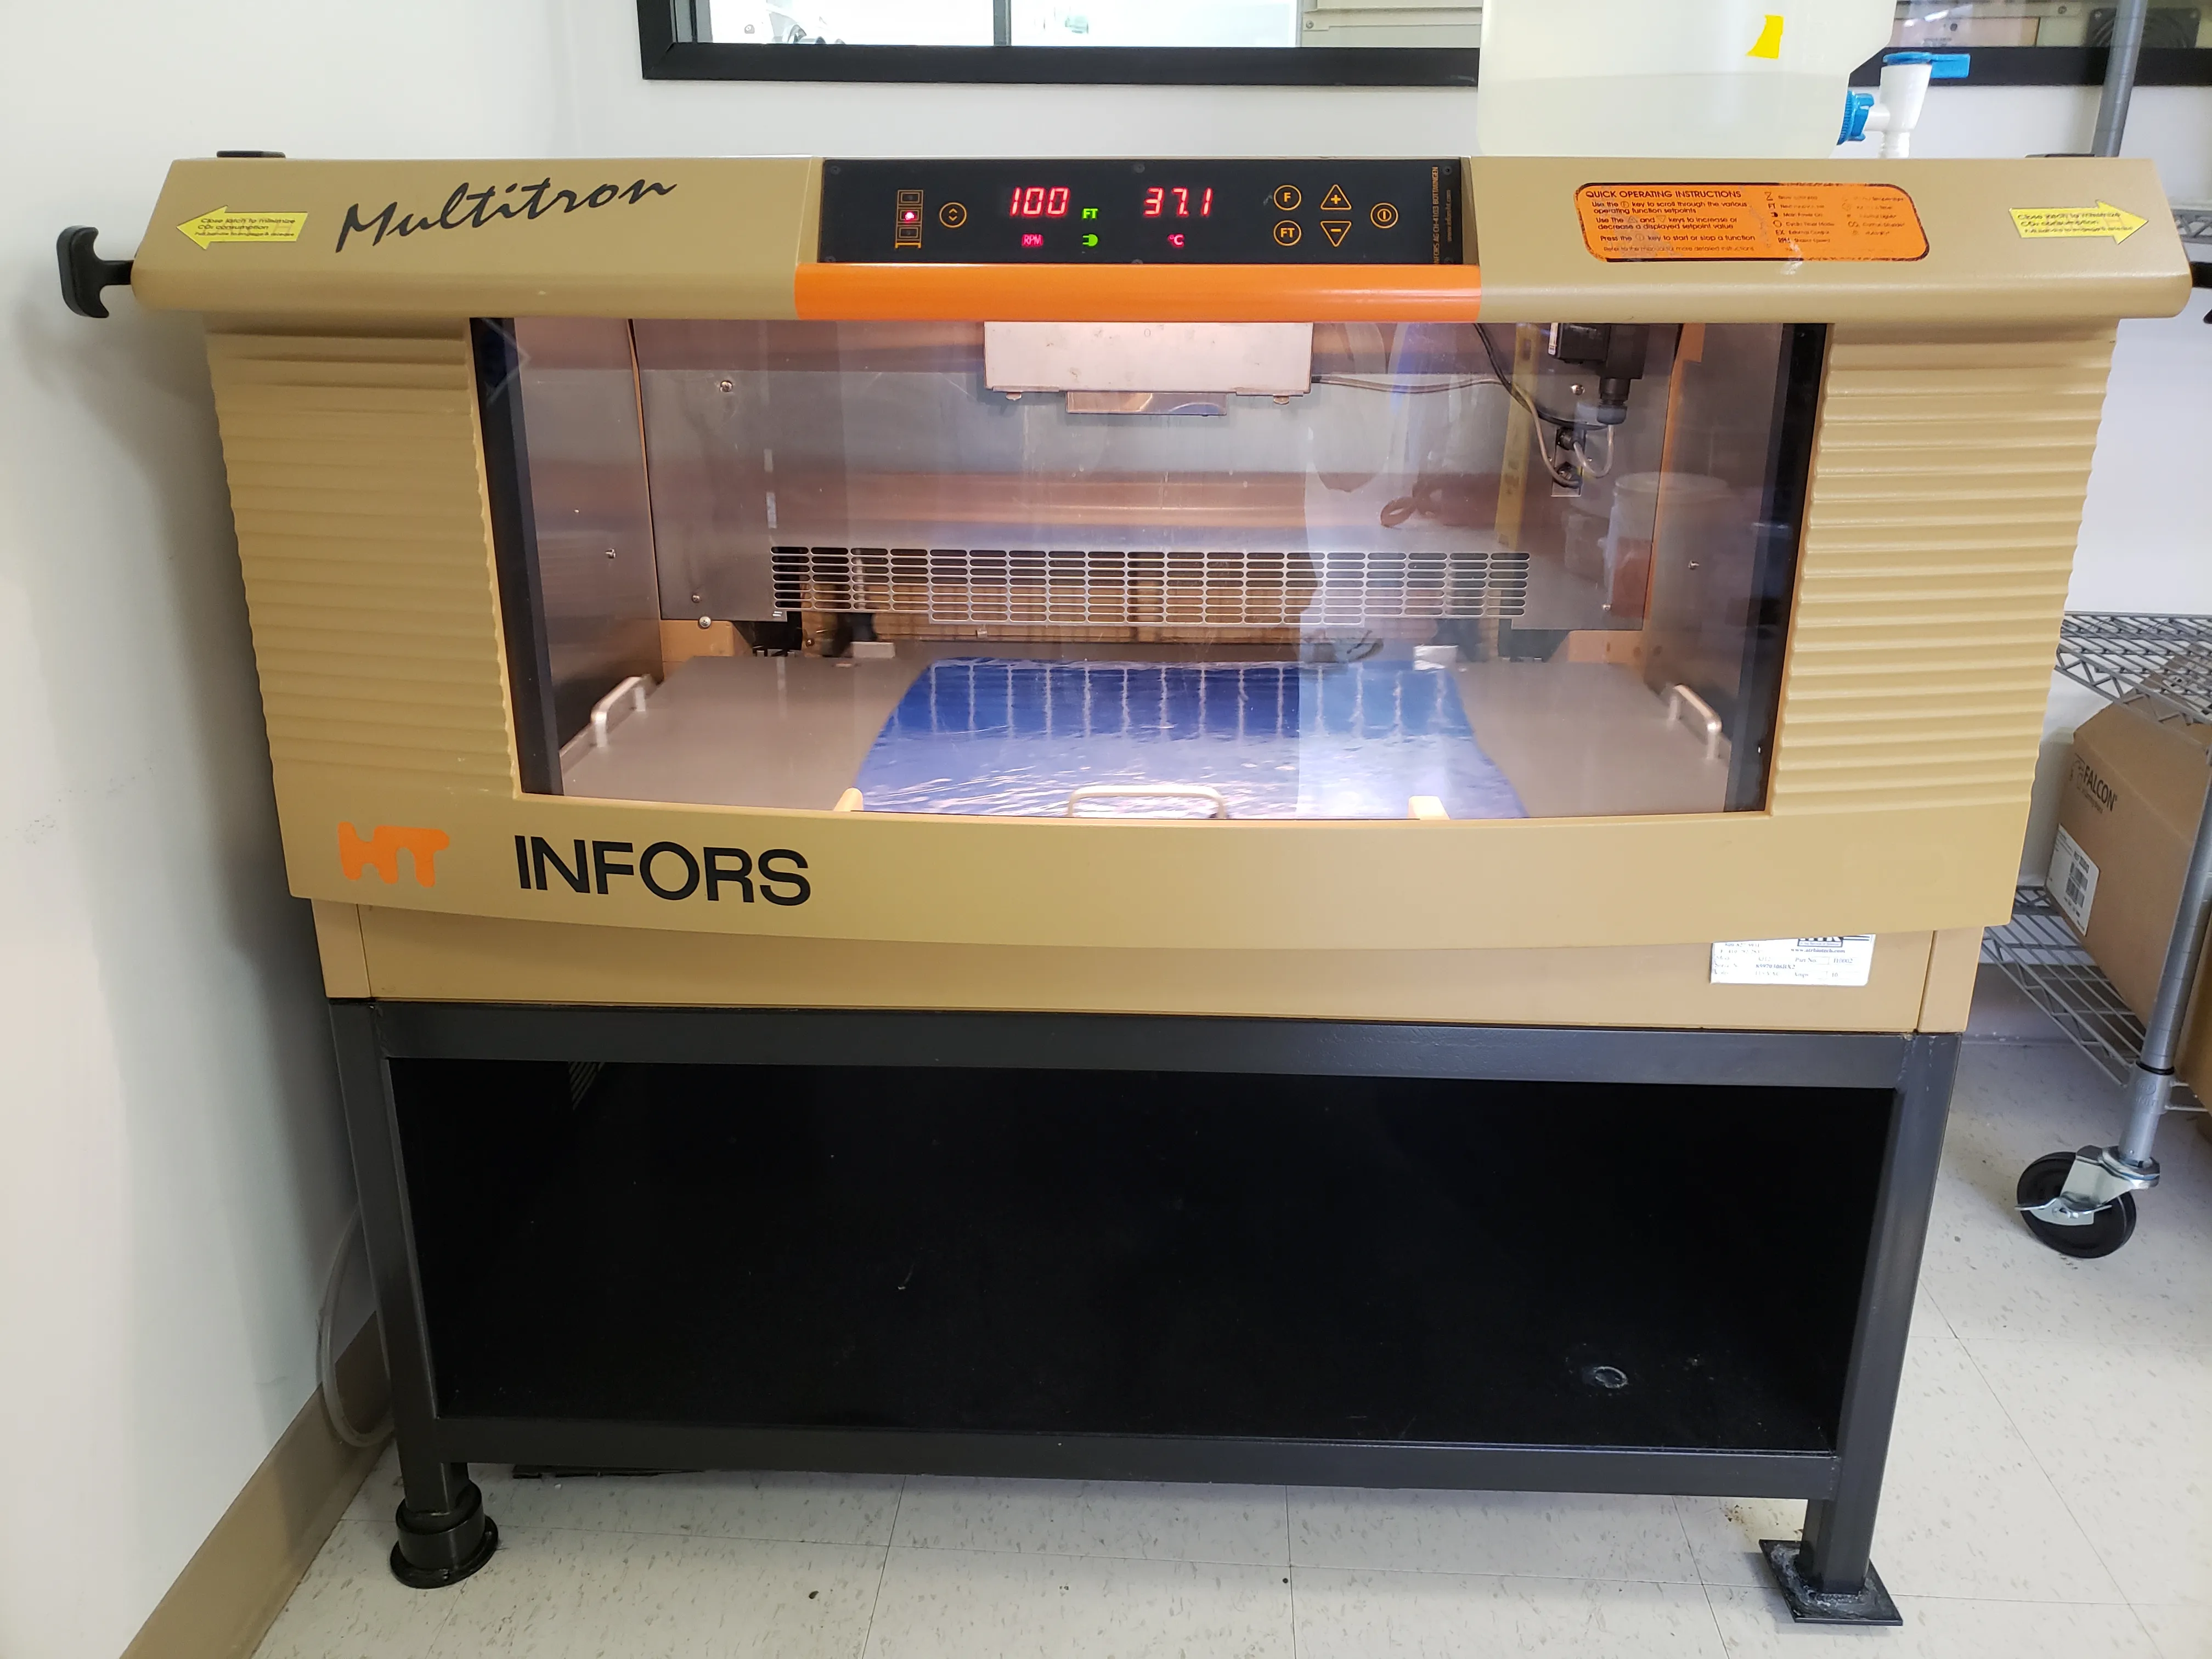 Infors HT Multitron Incubator Shaker with CO2 control - fully refurbished - $5000 obo